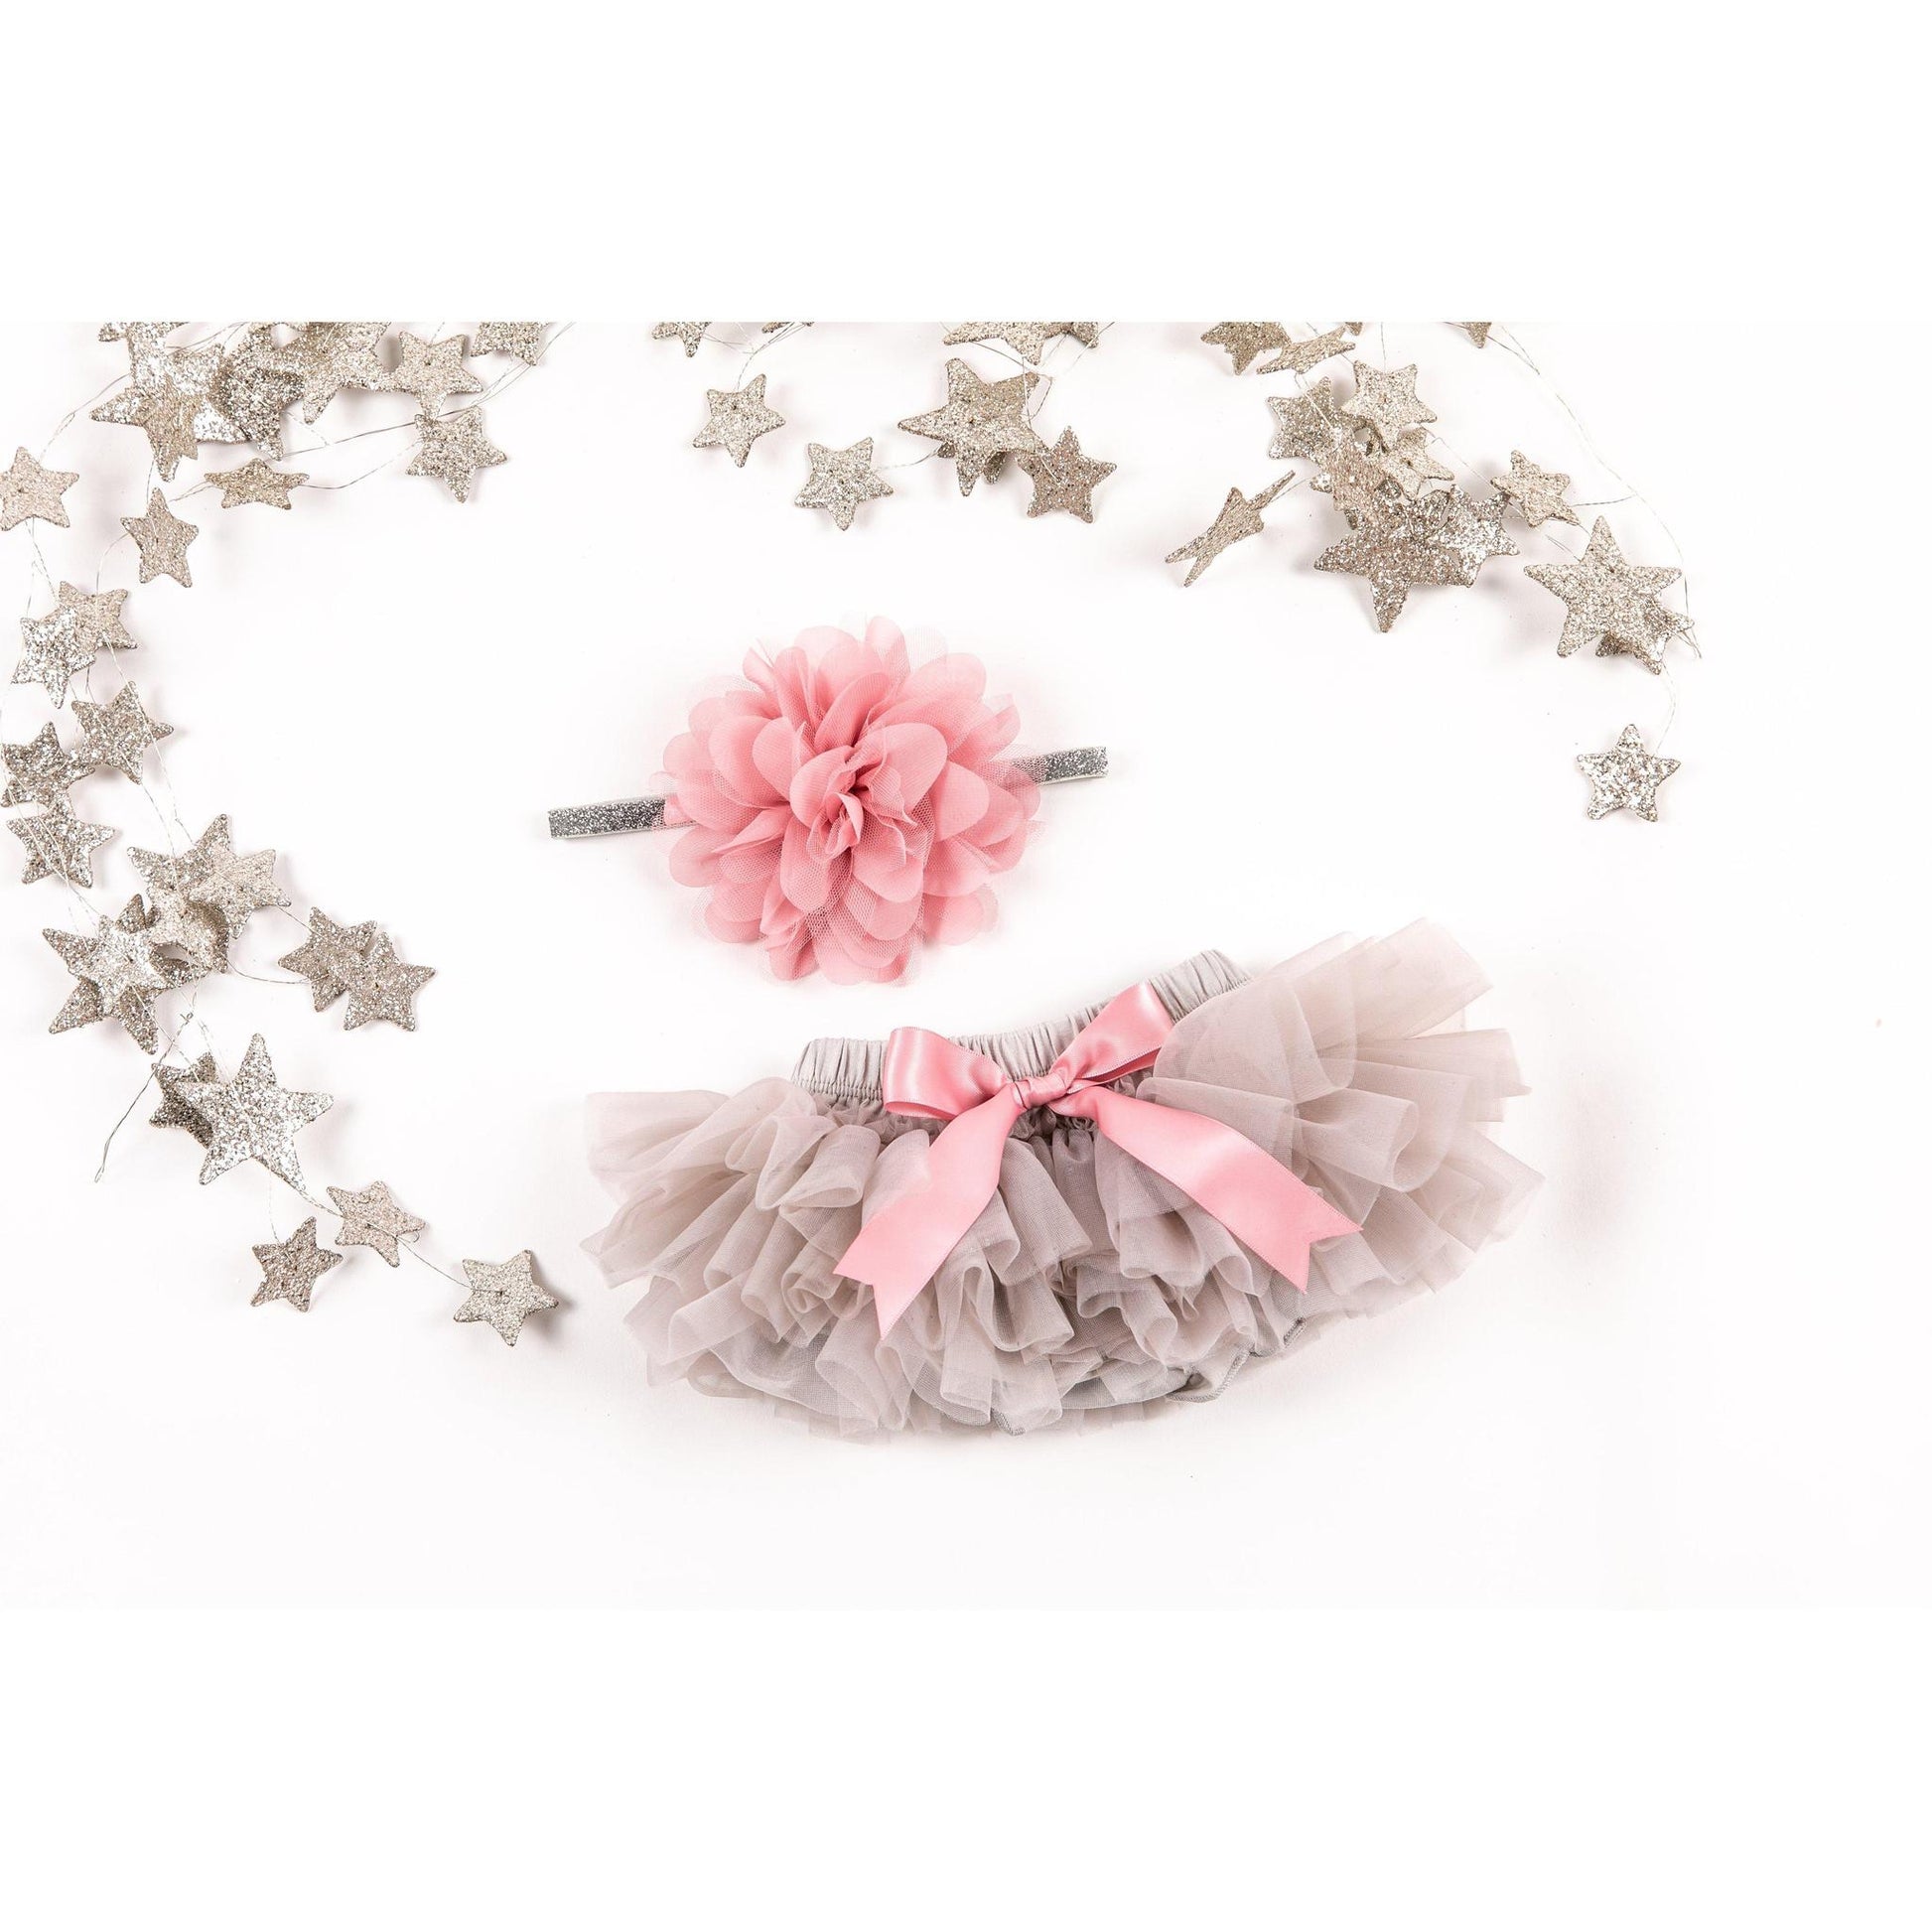 Gray and Vintage Pink Tutu Bloomer with Headband  - Doodlebug's Children's Boutique